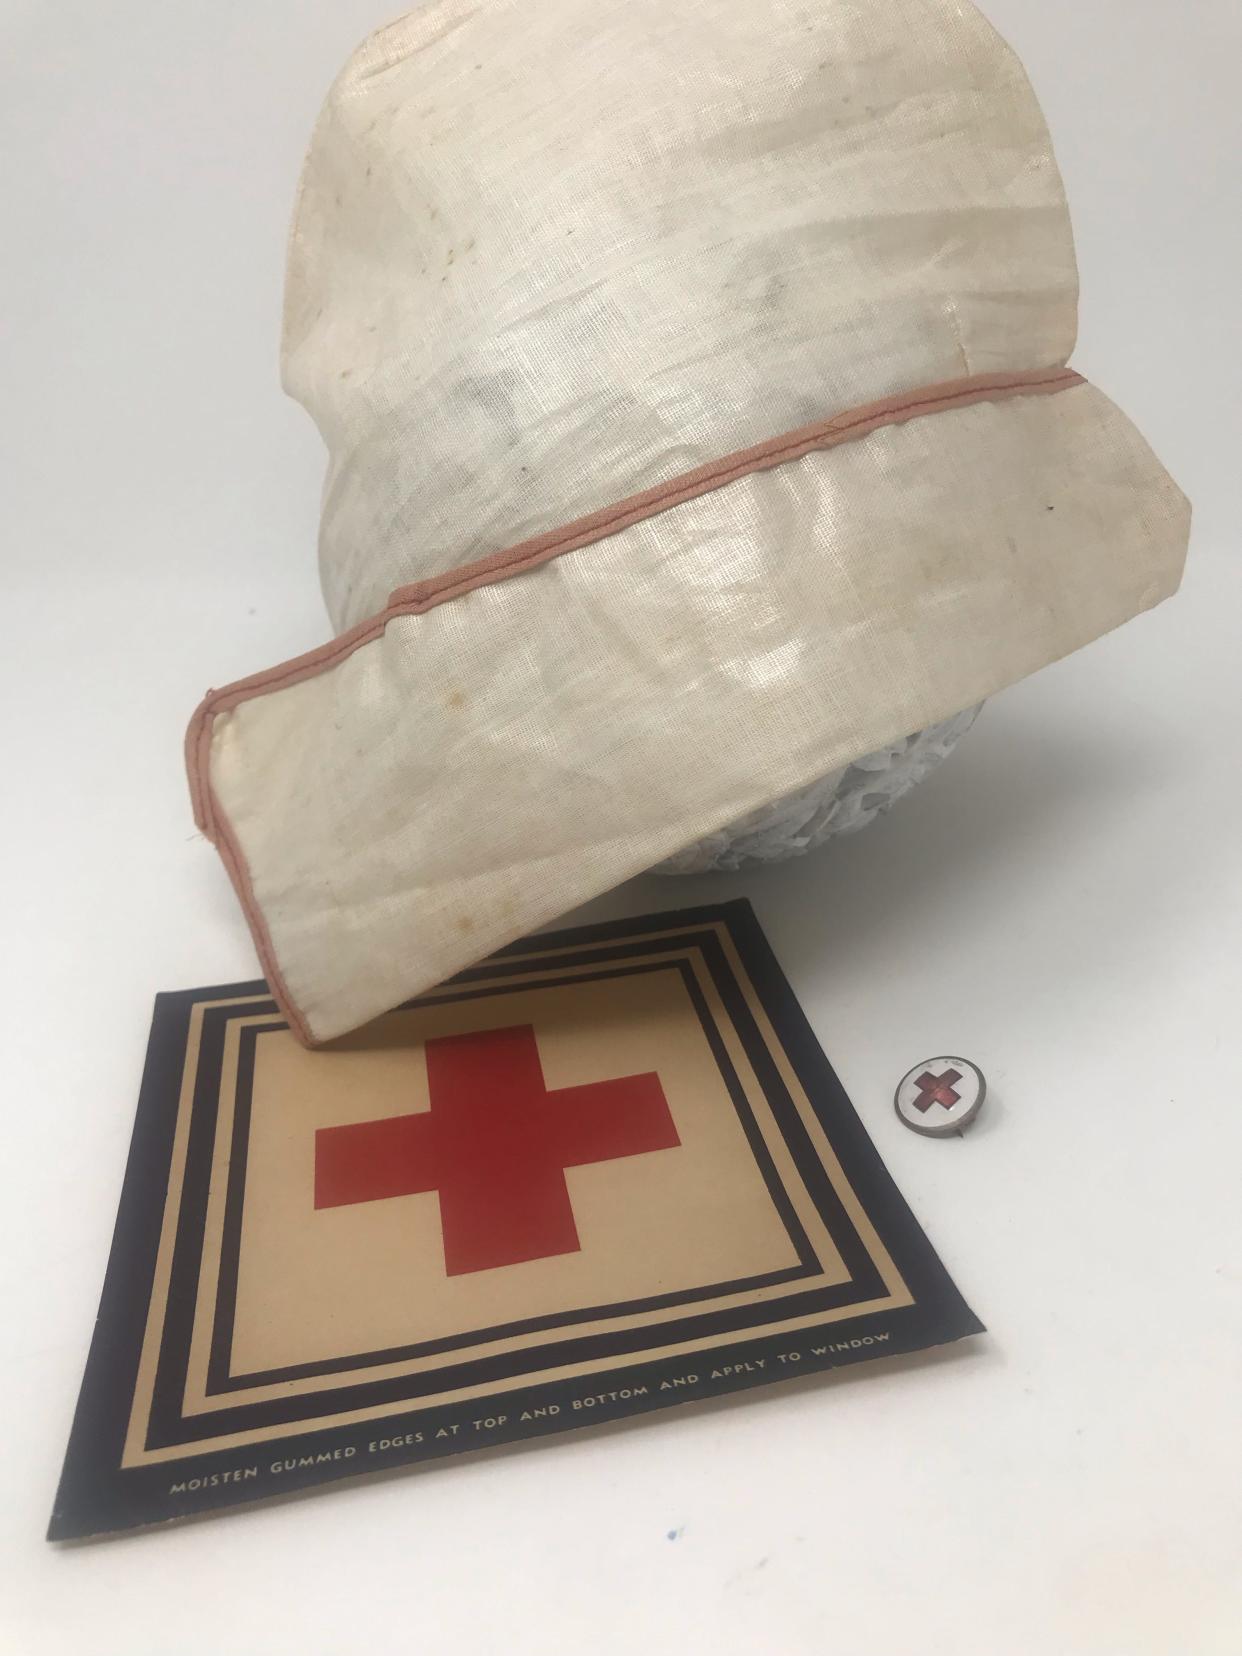 Among the items Andrea Chancellor's grandmother kept were a nursing cap and pin, and a Red Cross patch that was to be put in a window after donating to the Red Cross.